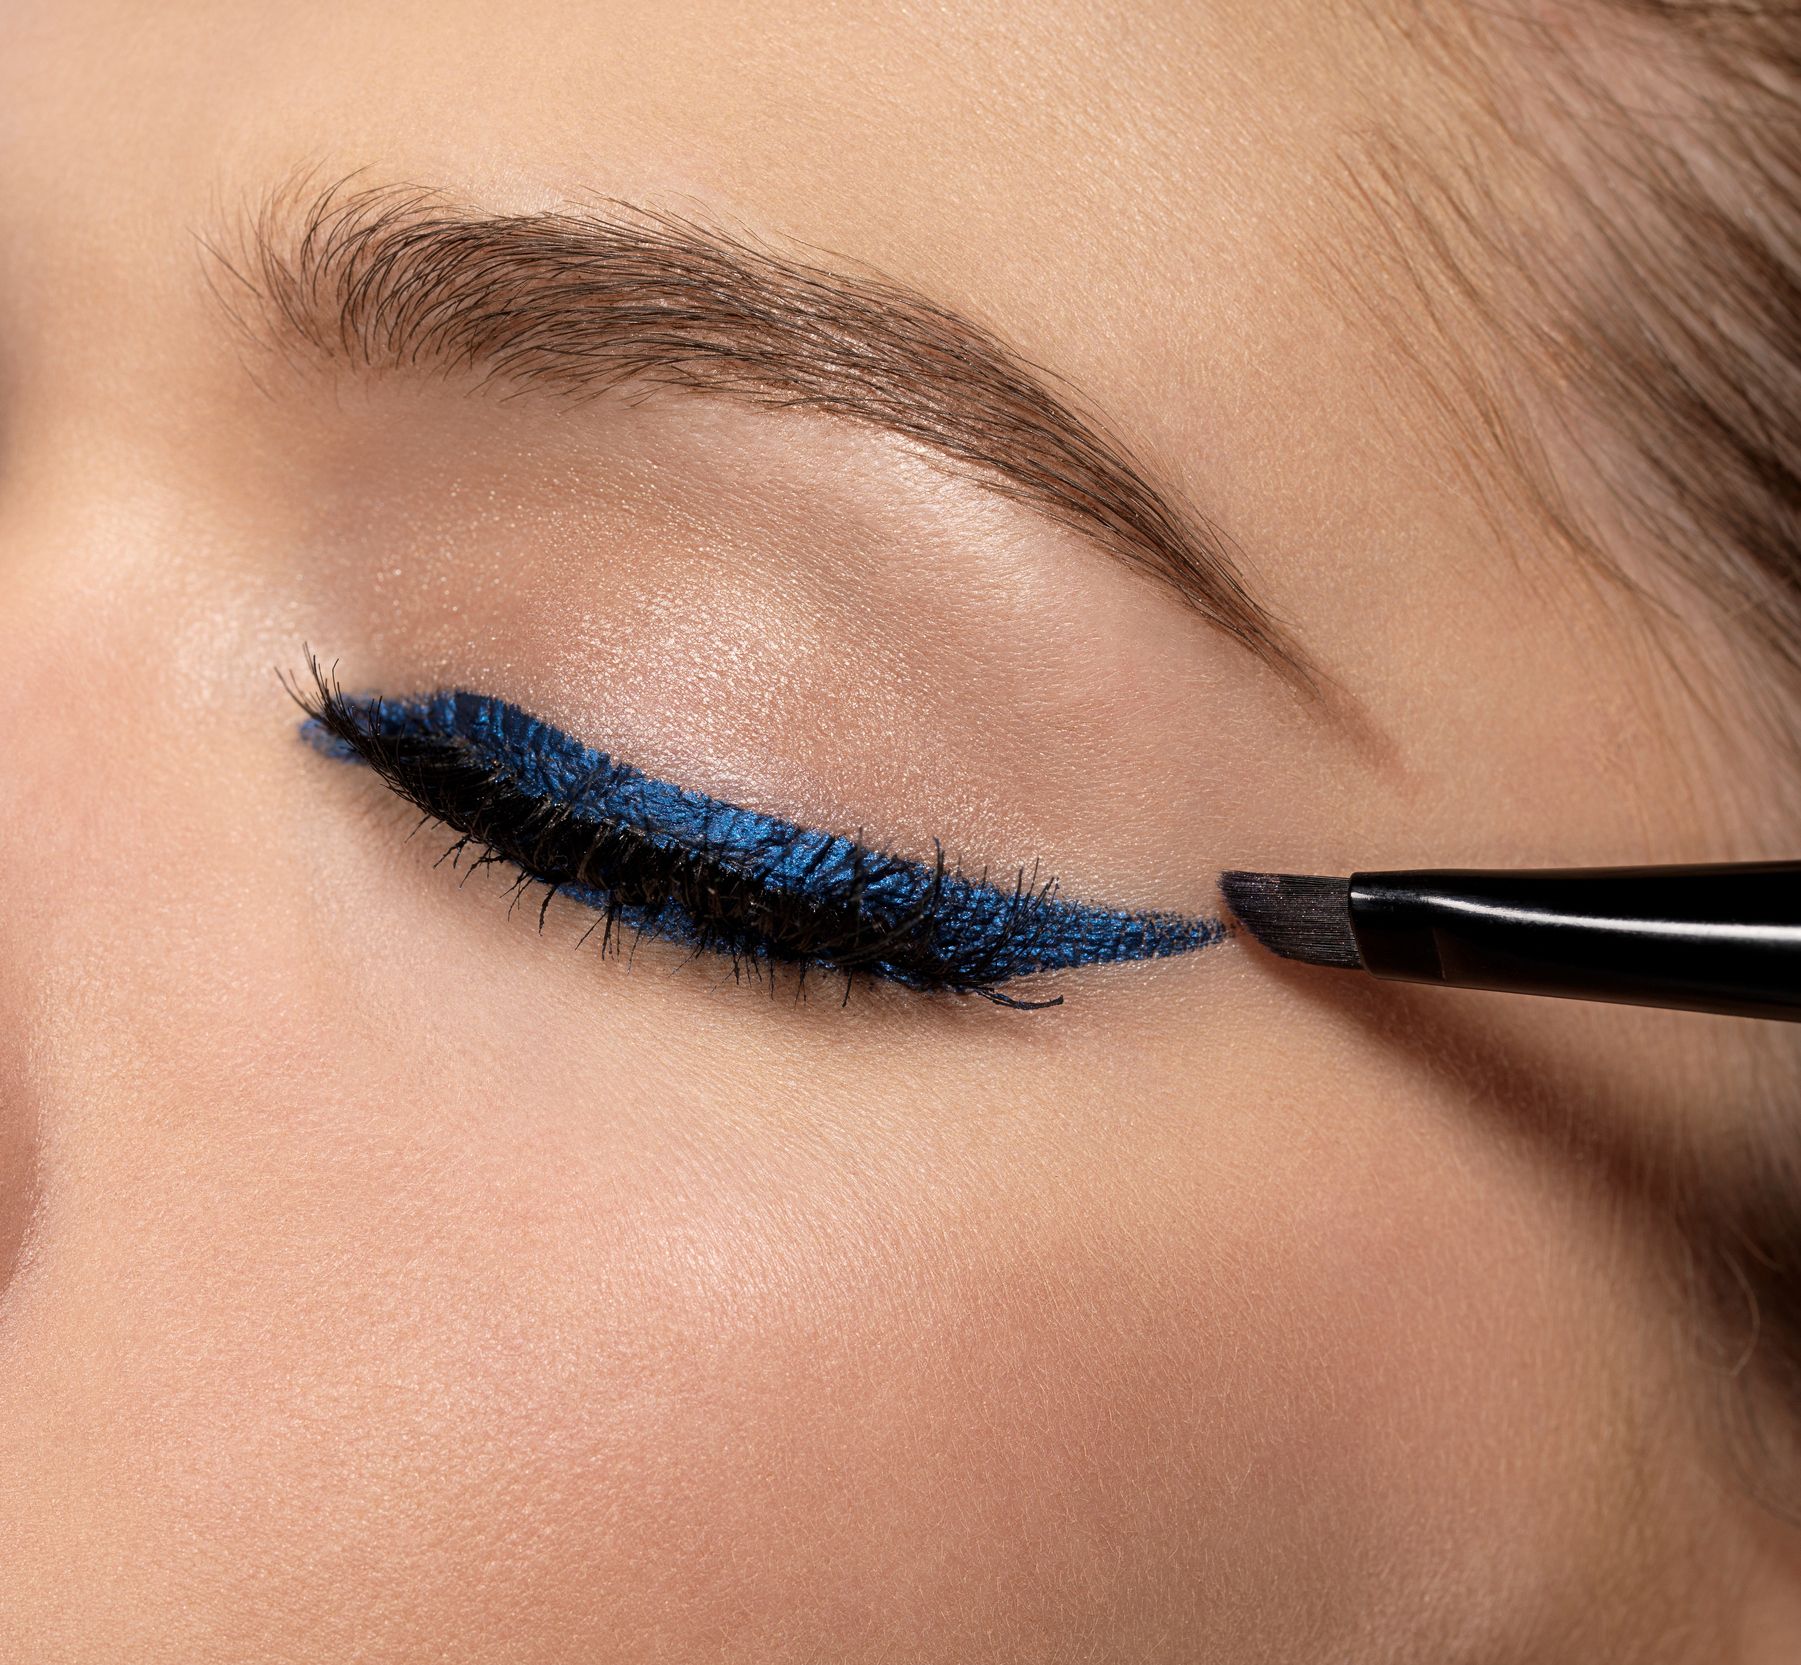 How to Apply Eyeliner Like a Pro - Step By Step Videos and Tips